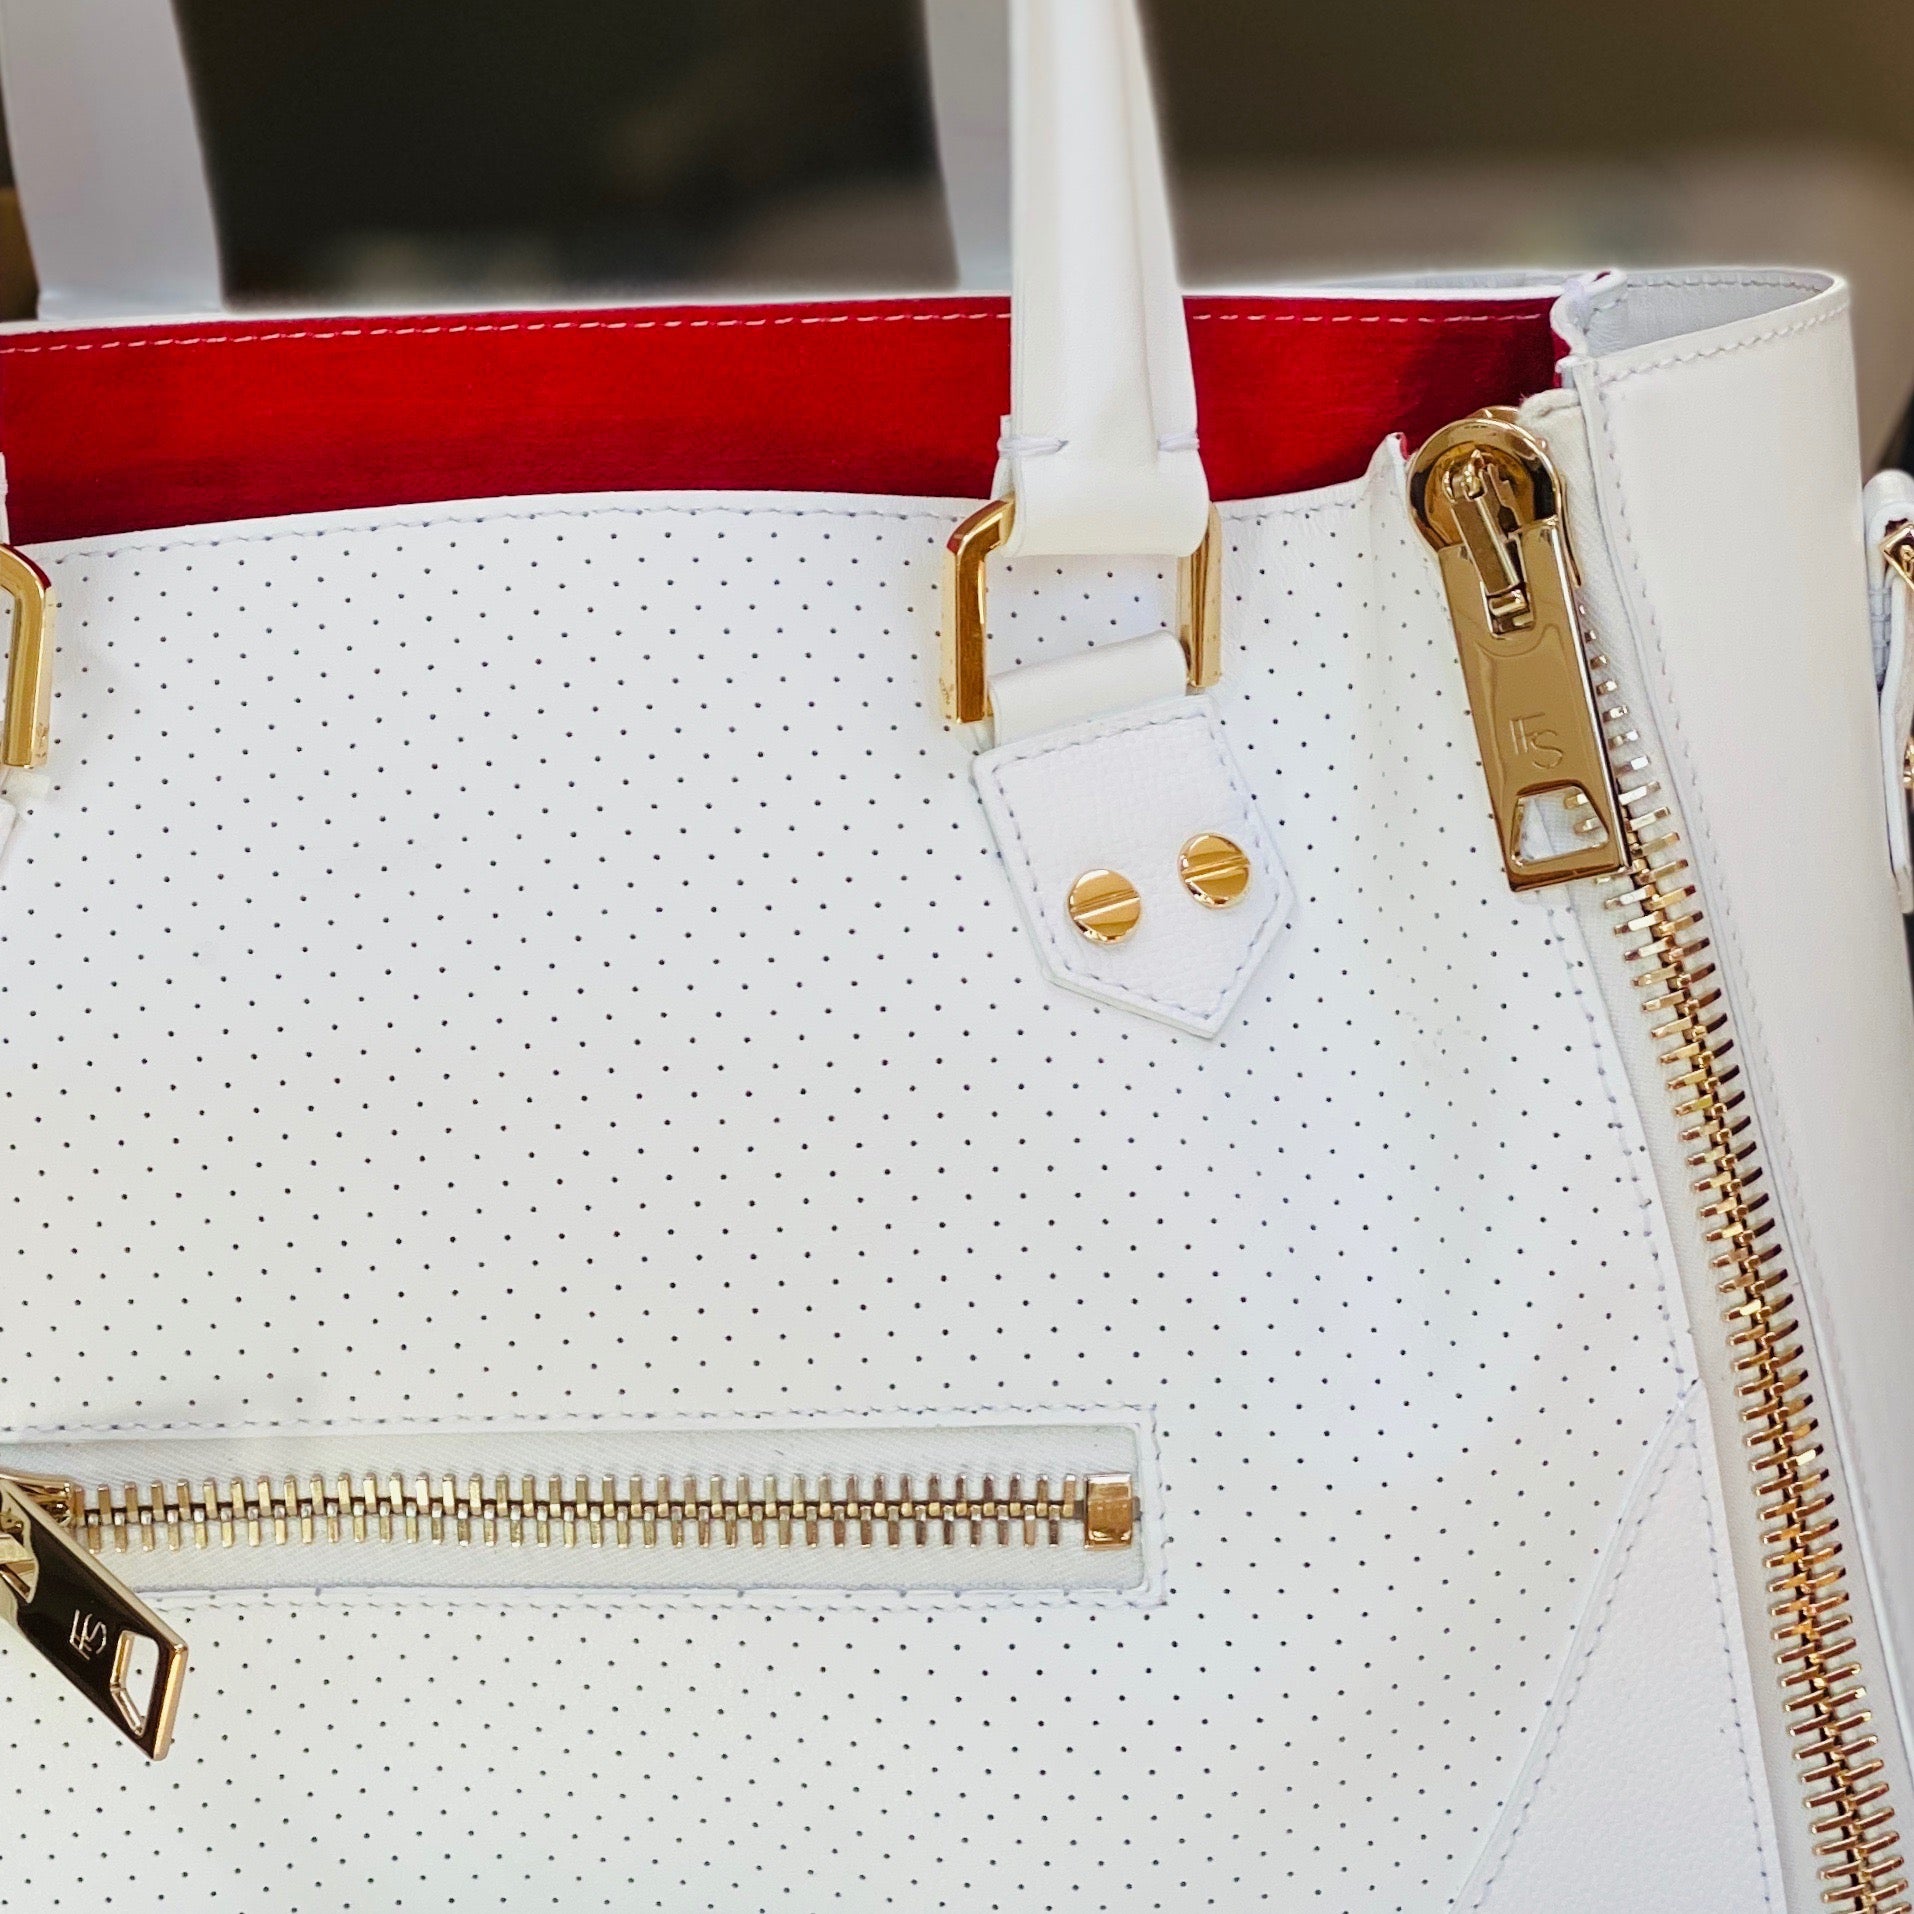 One Bag (White Leather w/Gold Hardware)